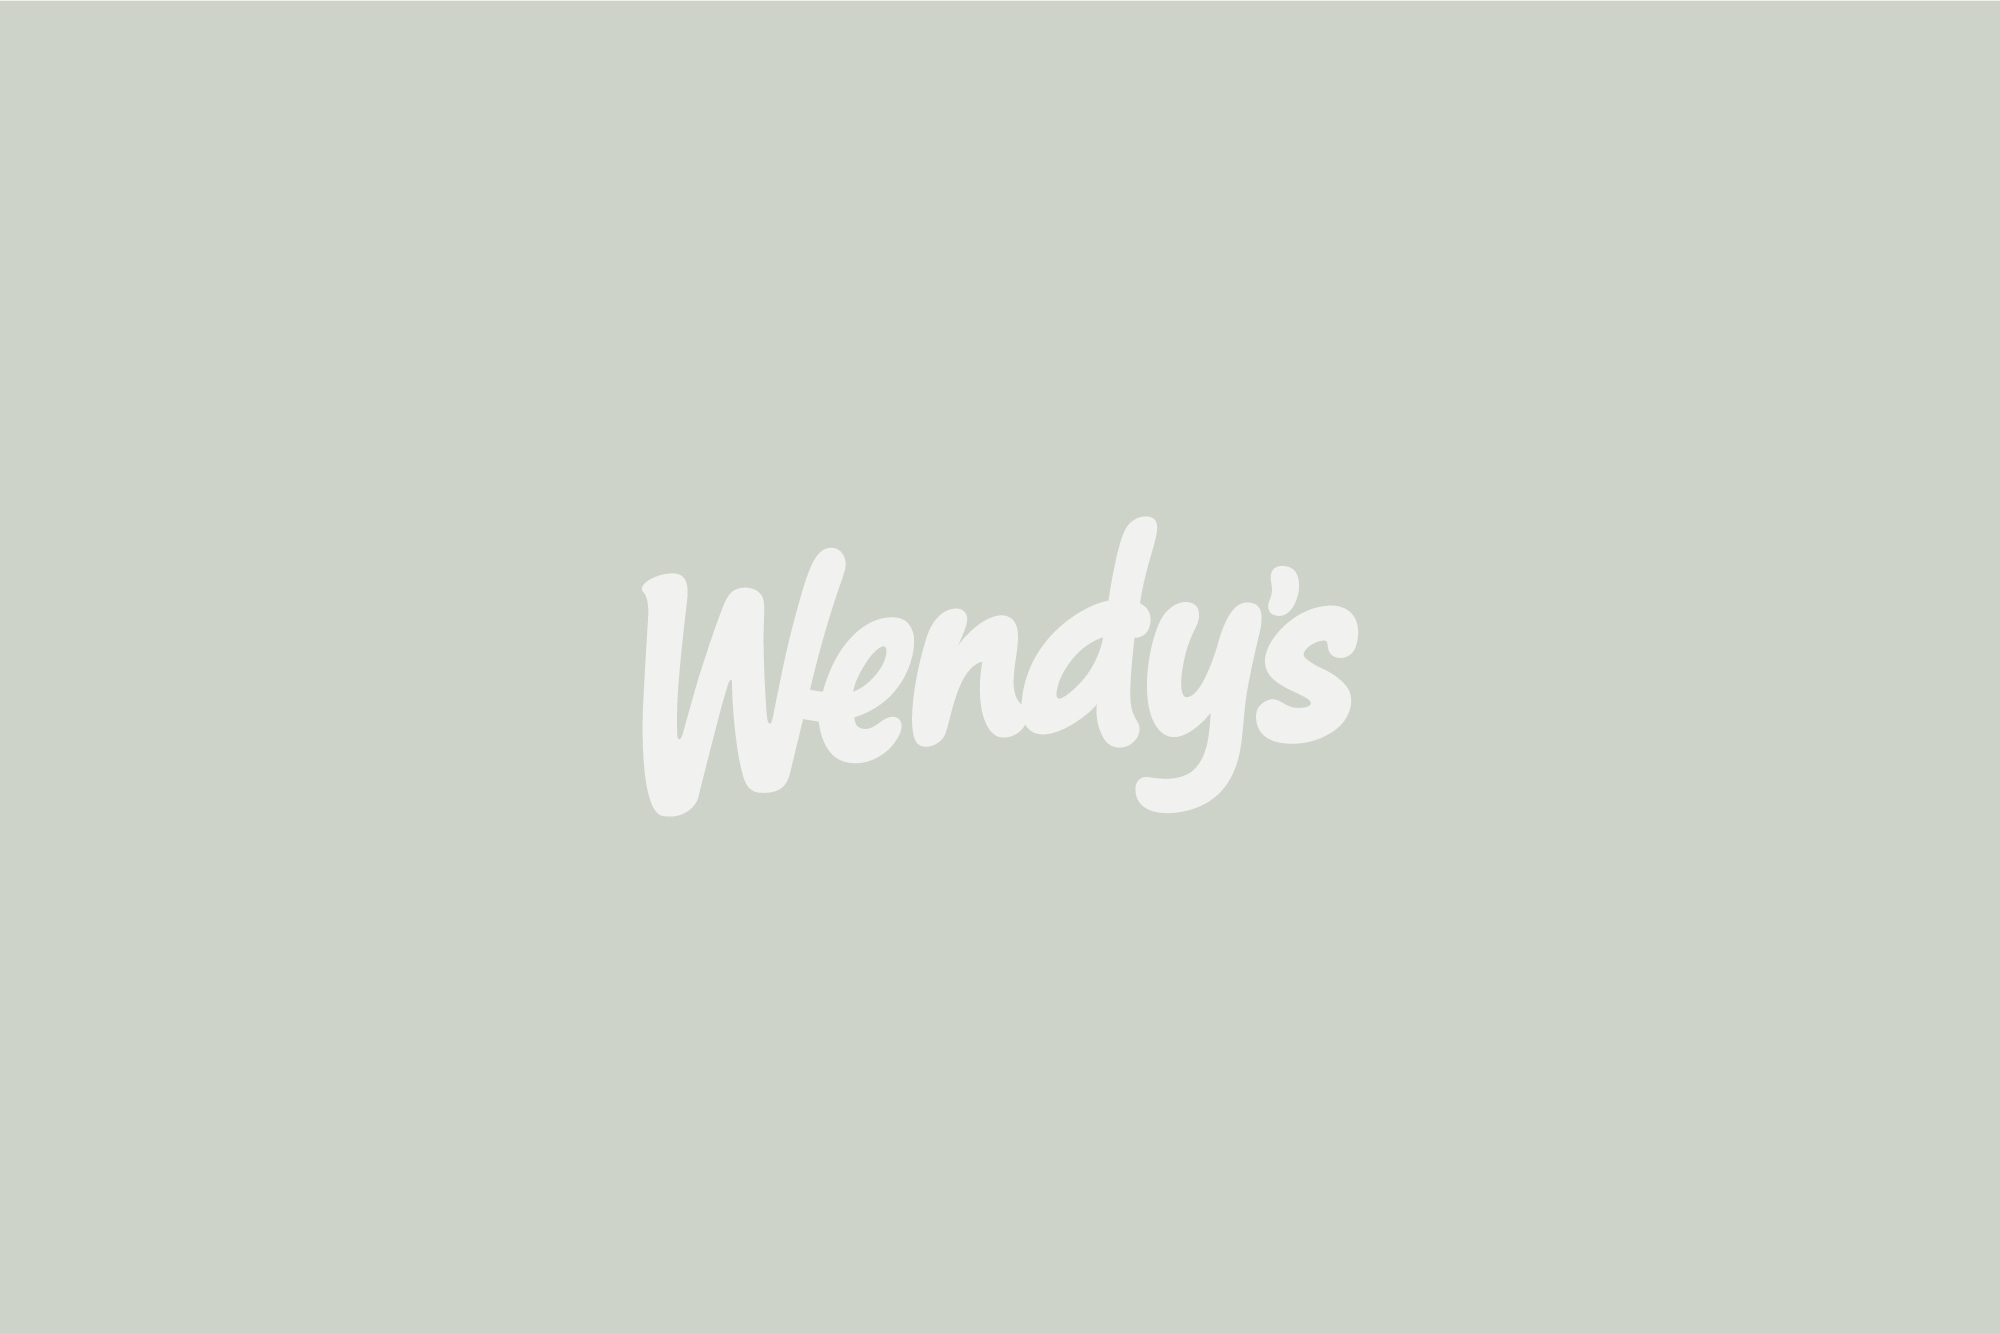 Wendy's Logo Placeholder